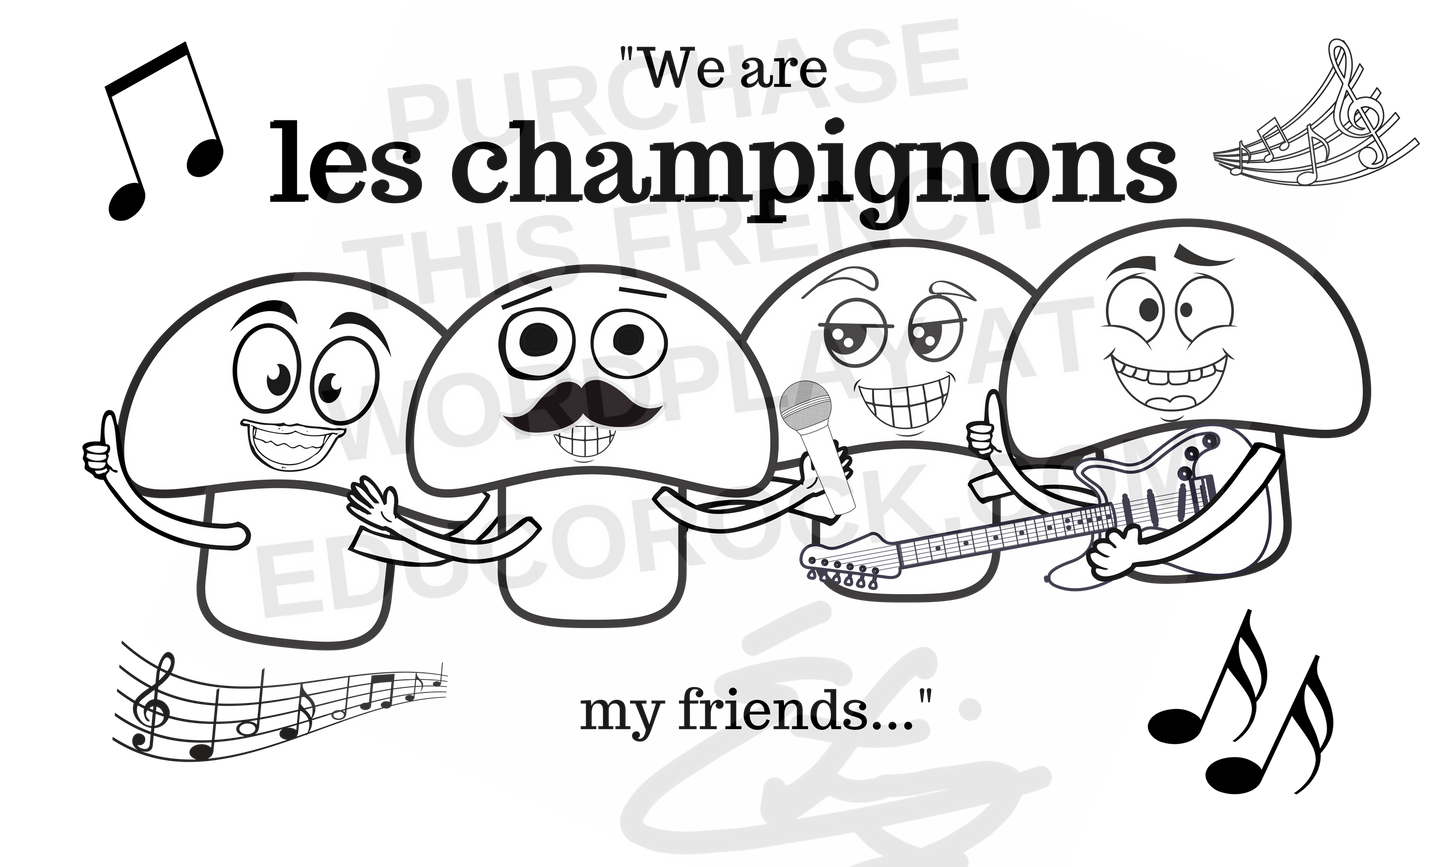 We are les champignons  - High quality downloadable image